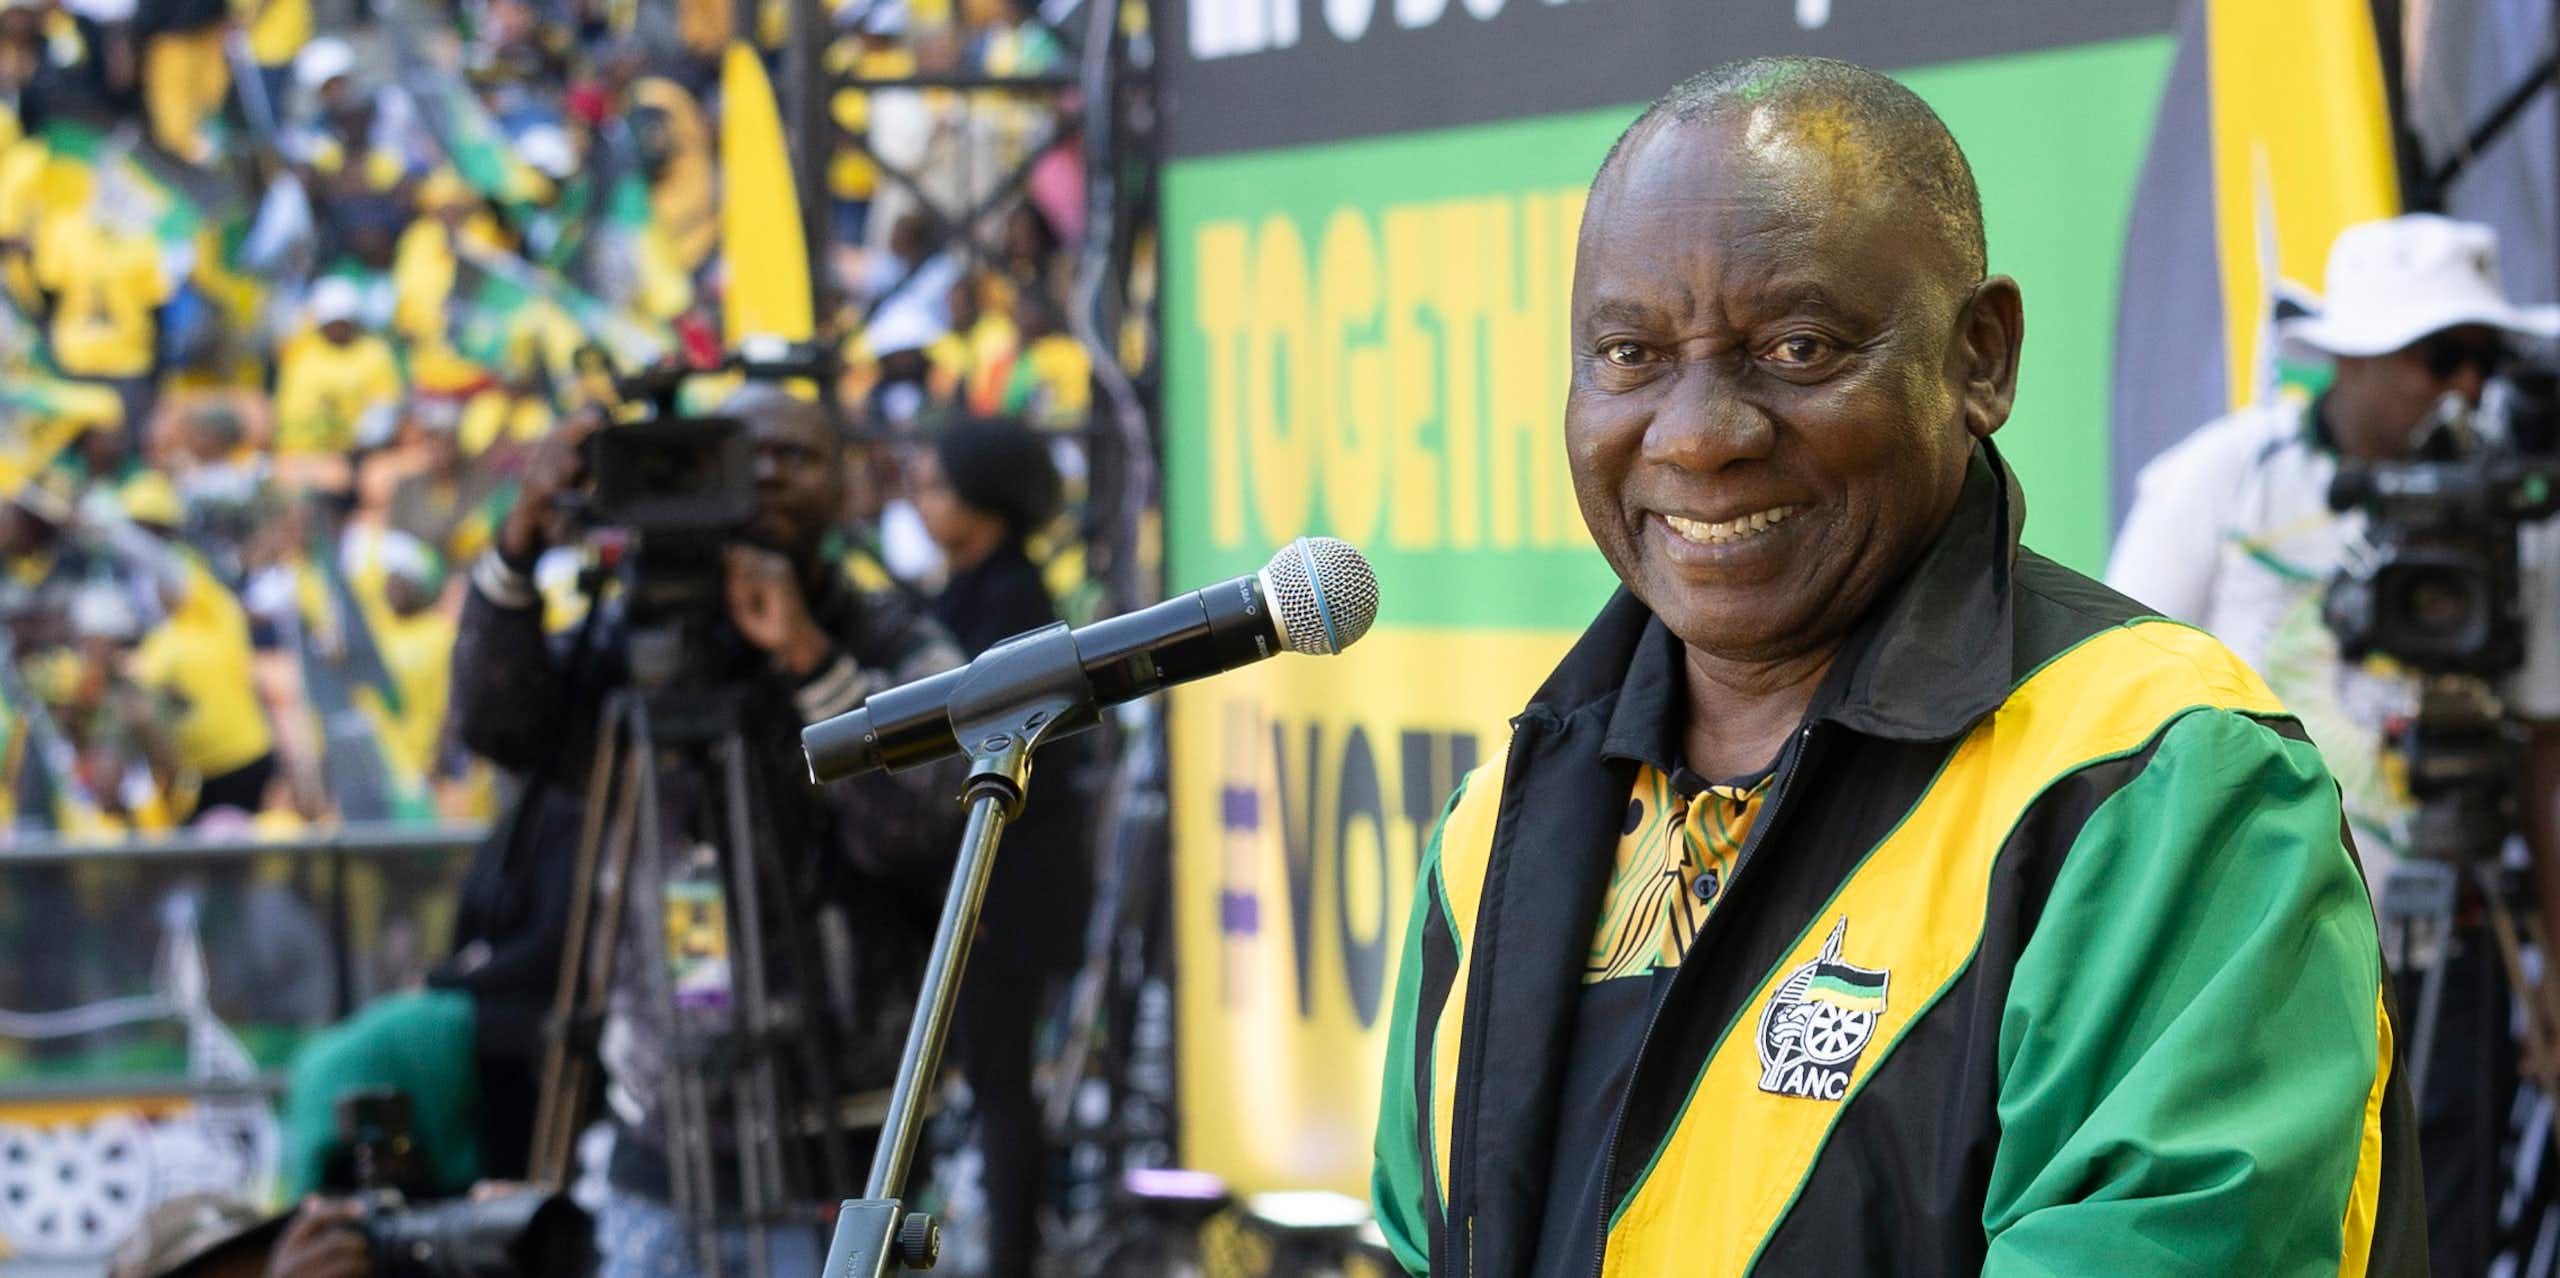 A man dressed in a green, yellow and black jacket standing in front of a microphone smiling at the camera.